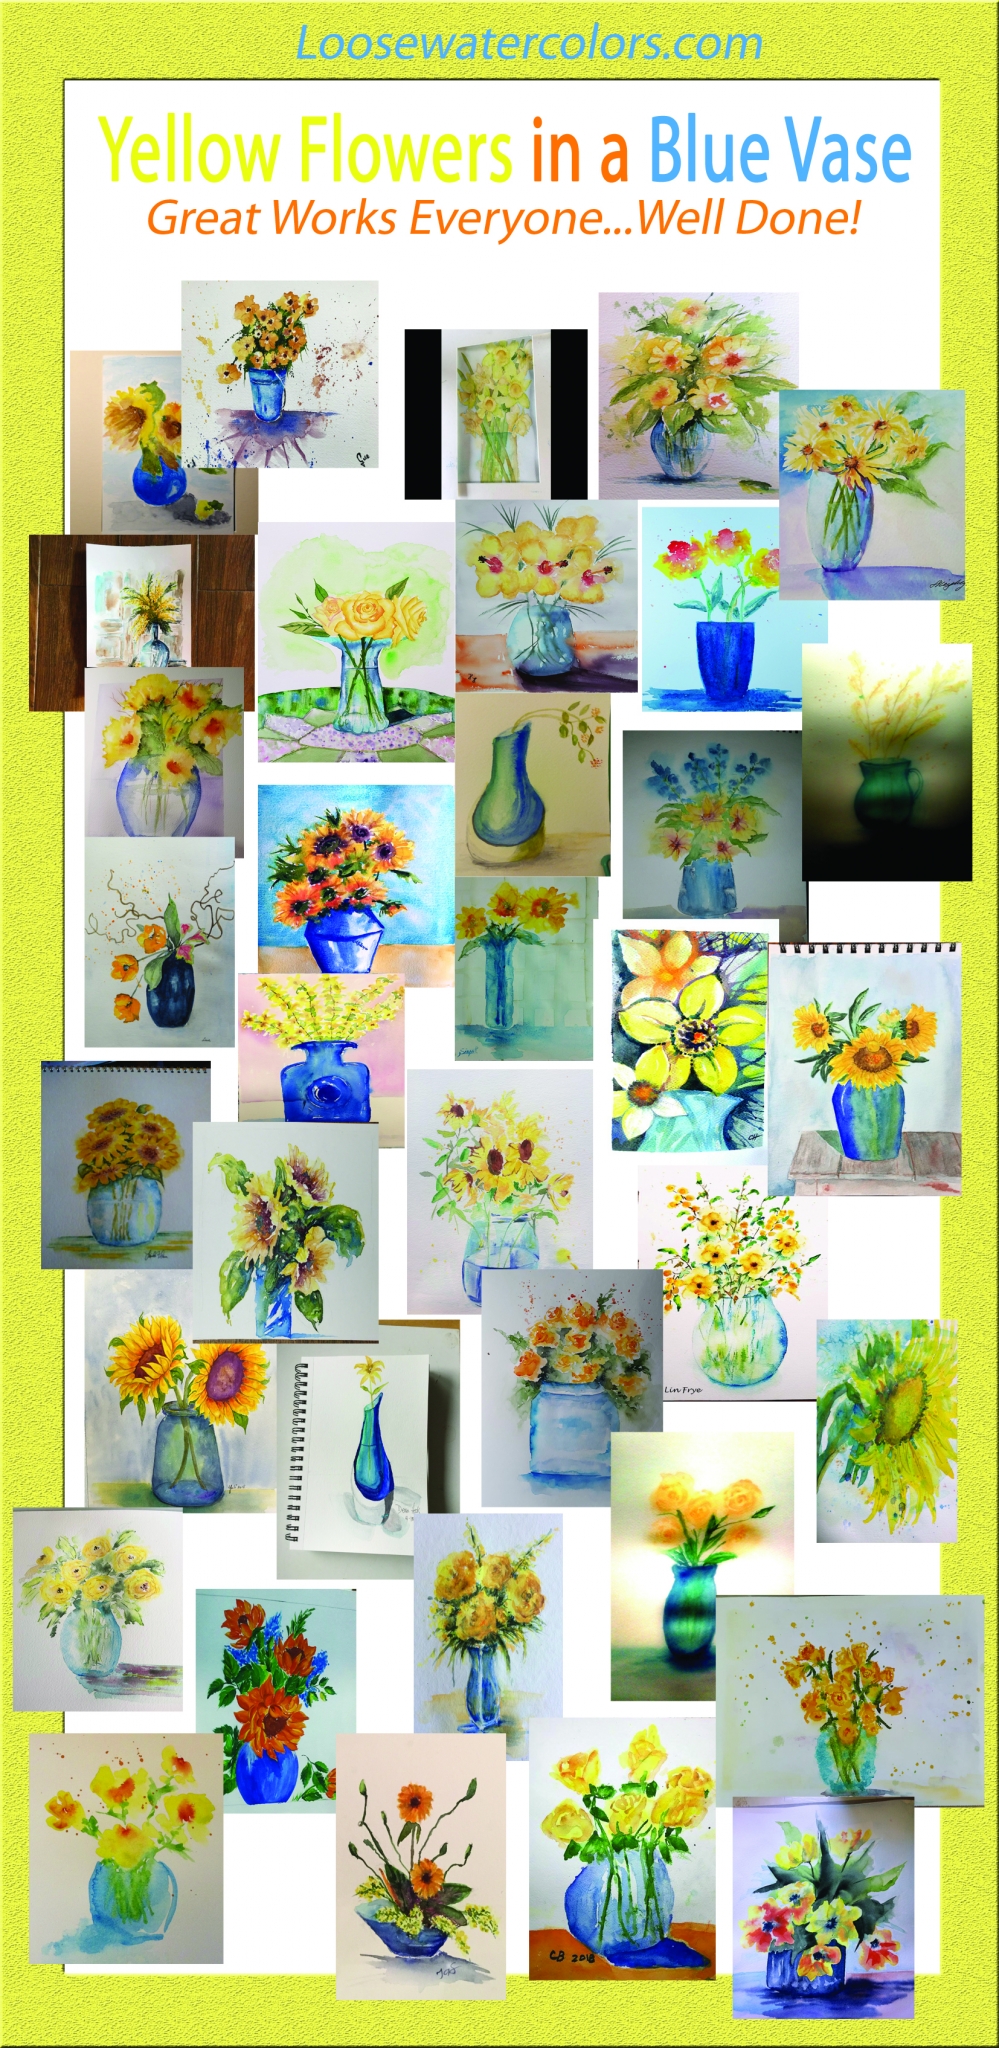 Yellow Flowers in a Blue Vase - Andrew Geeson Loose Watercolours